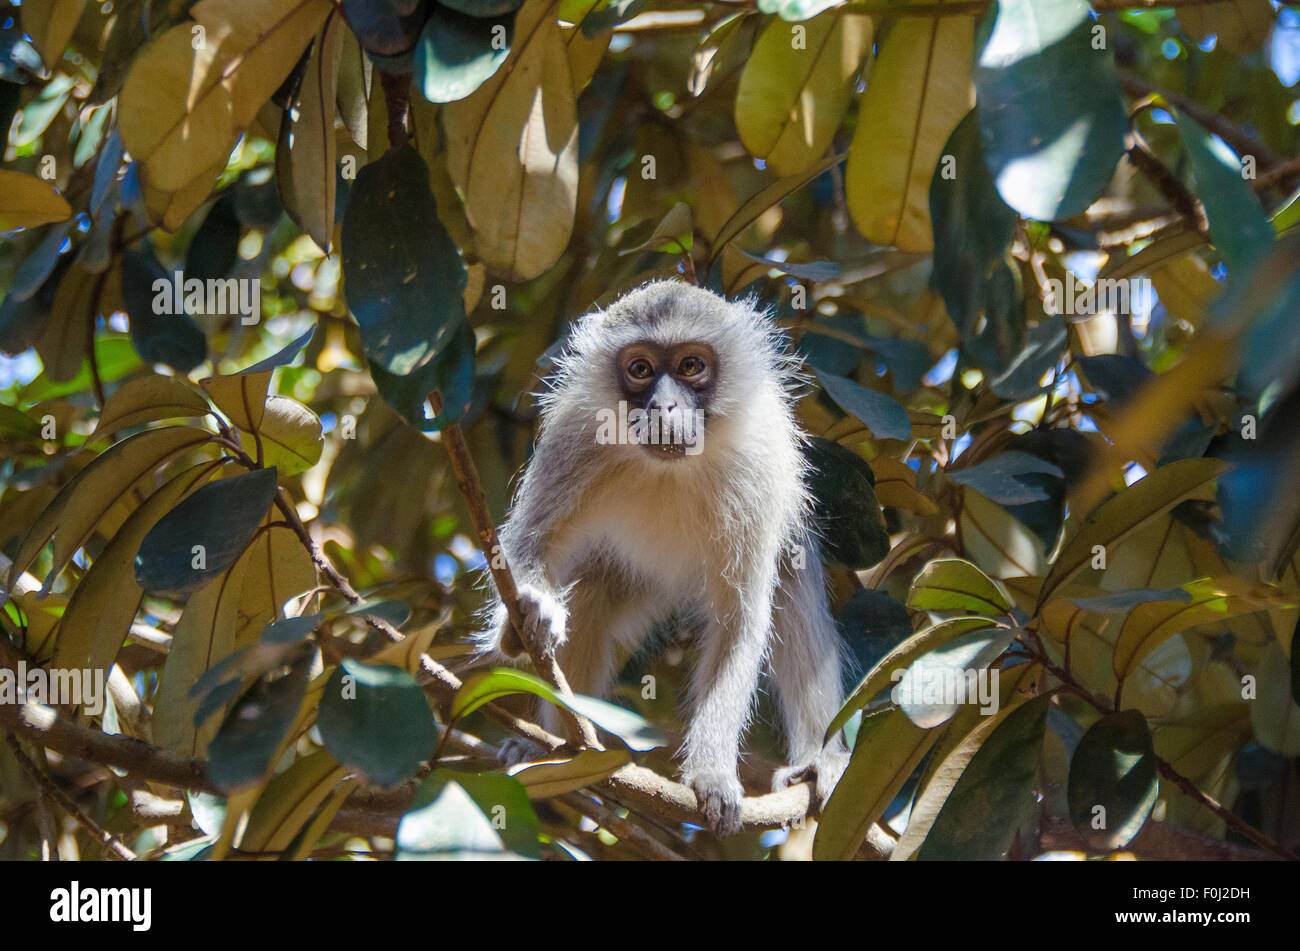 A baby Vervet monkey curiously peeks out of the forest canopy as the sun illuminates its face. Stock Photo